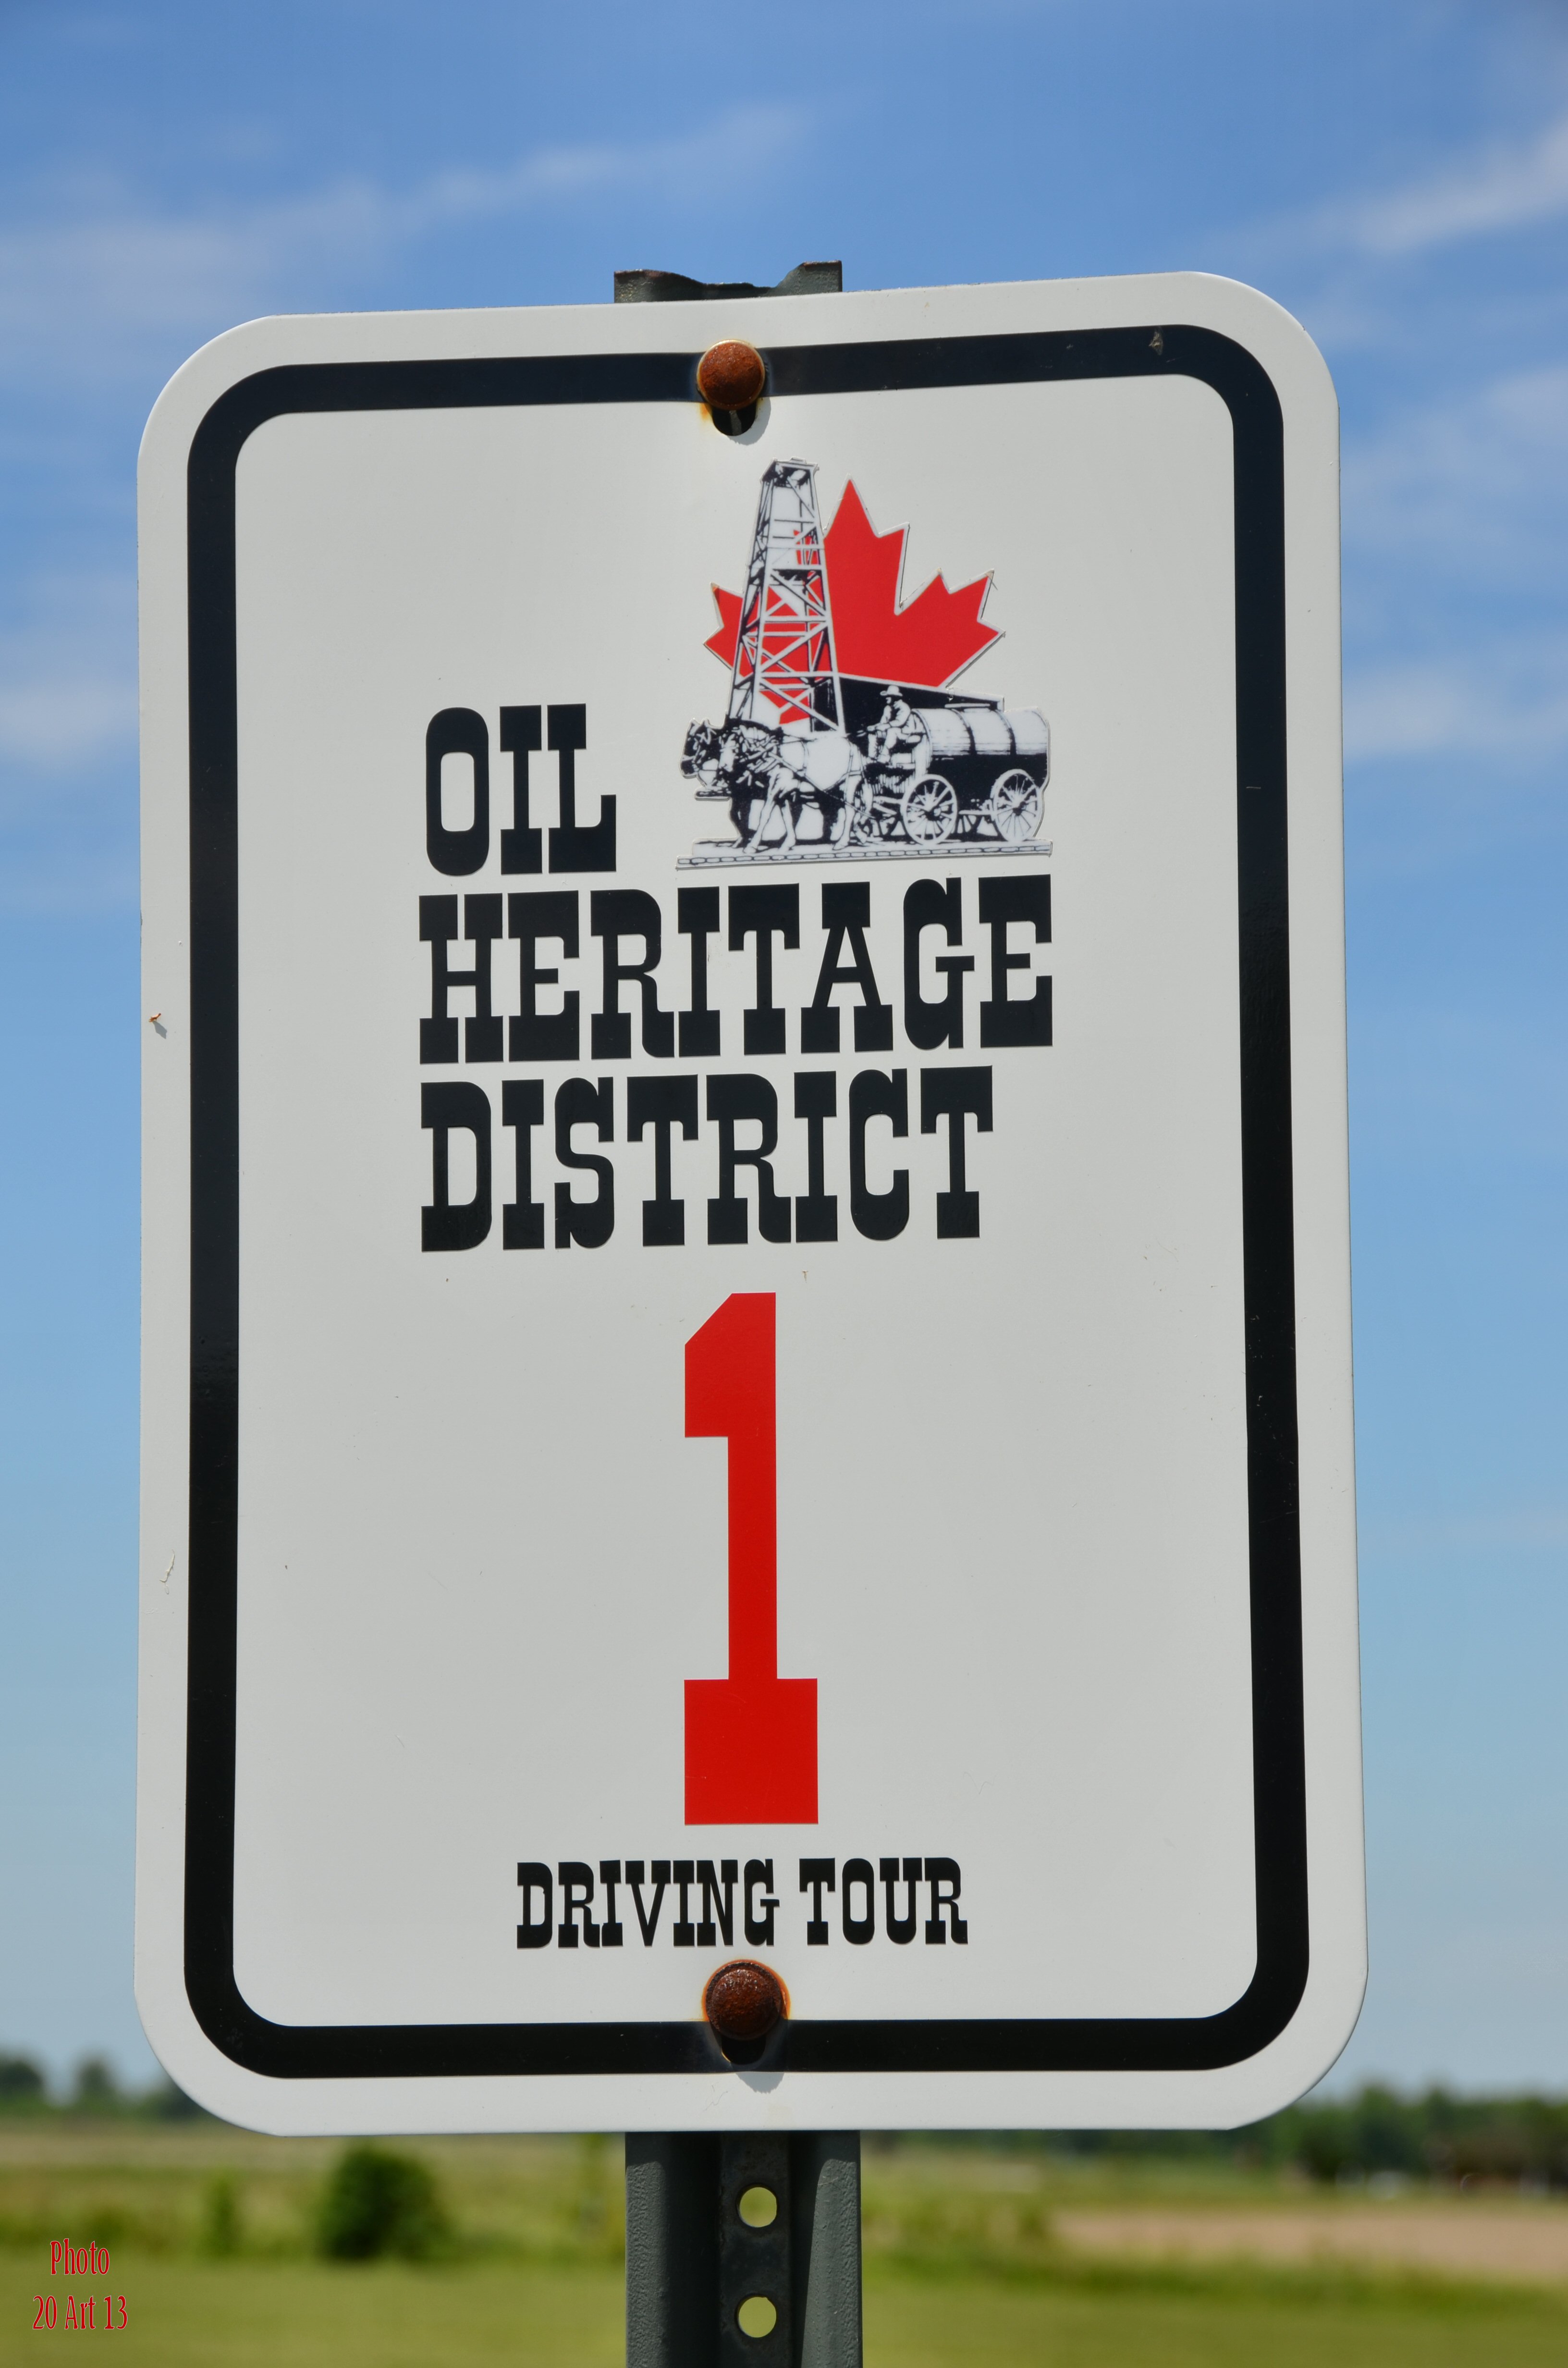 Sign for driving tour.